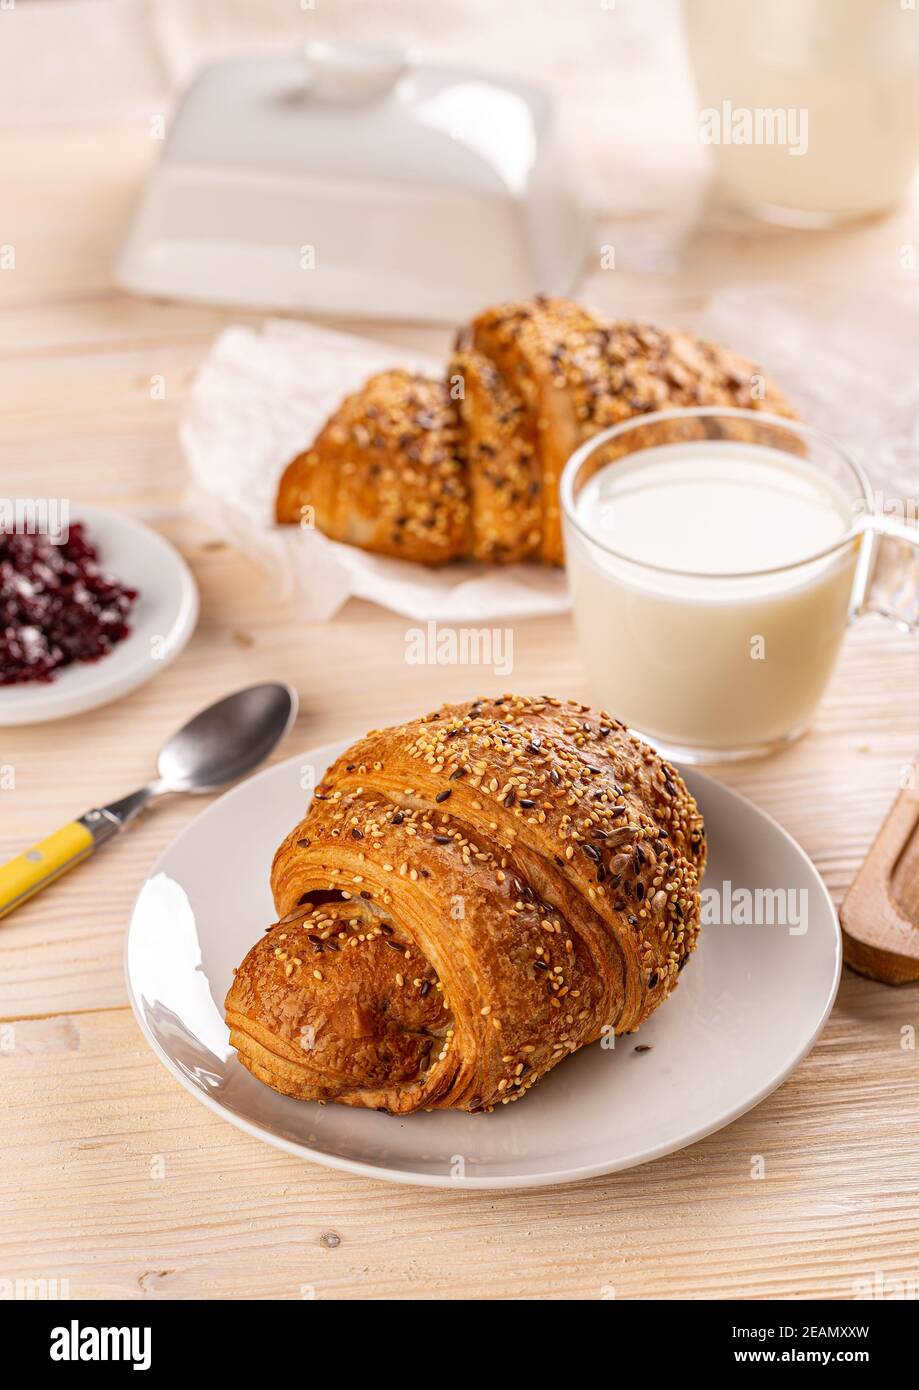 Traditional breakfast with croissant Stock Photo